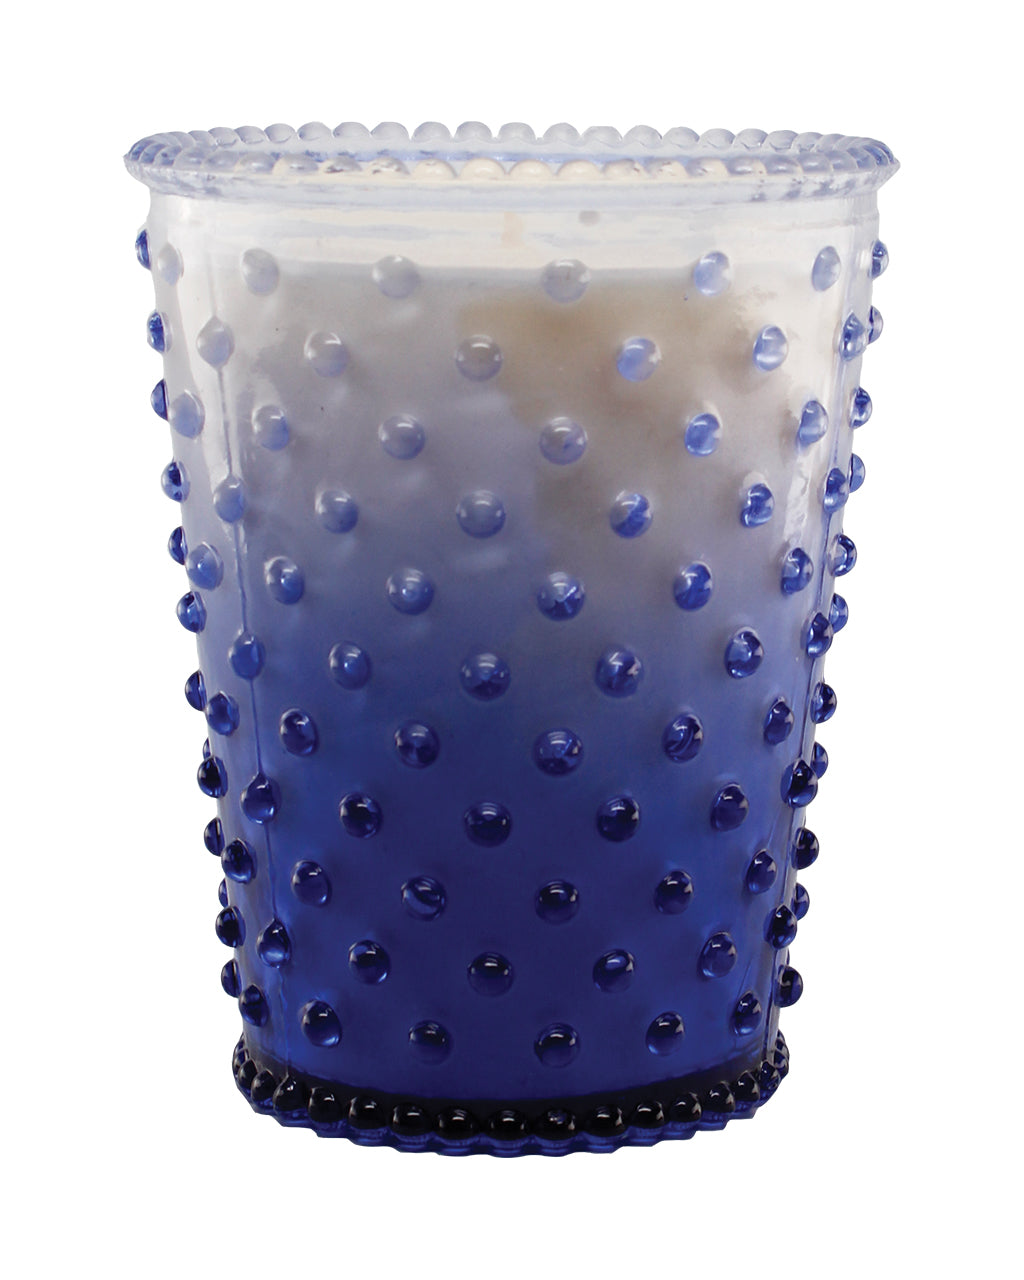 A Simpatico NO. 63 Limited Edition Patchouli Violet Hobnail Glass Candle with a textured, bubble design and a white soy and vegetable wax blend candle inside, isolated on a white background.